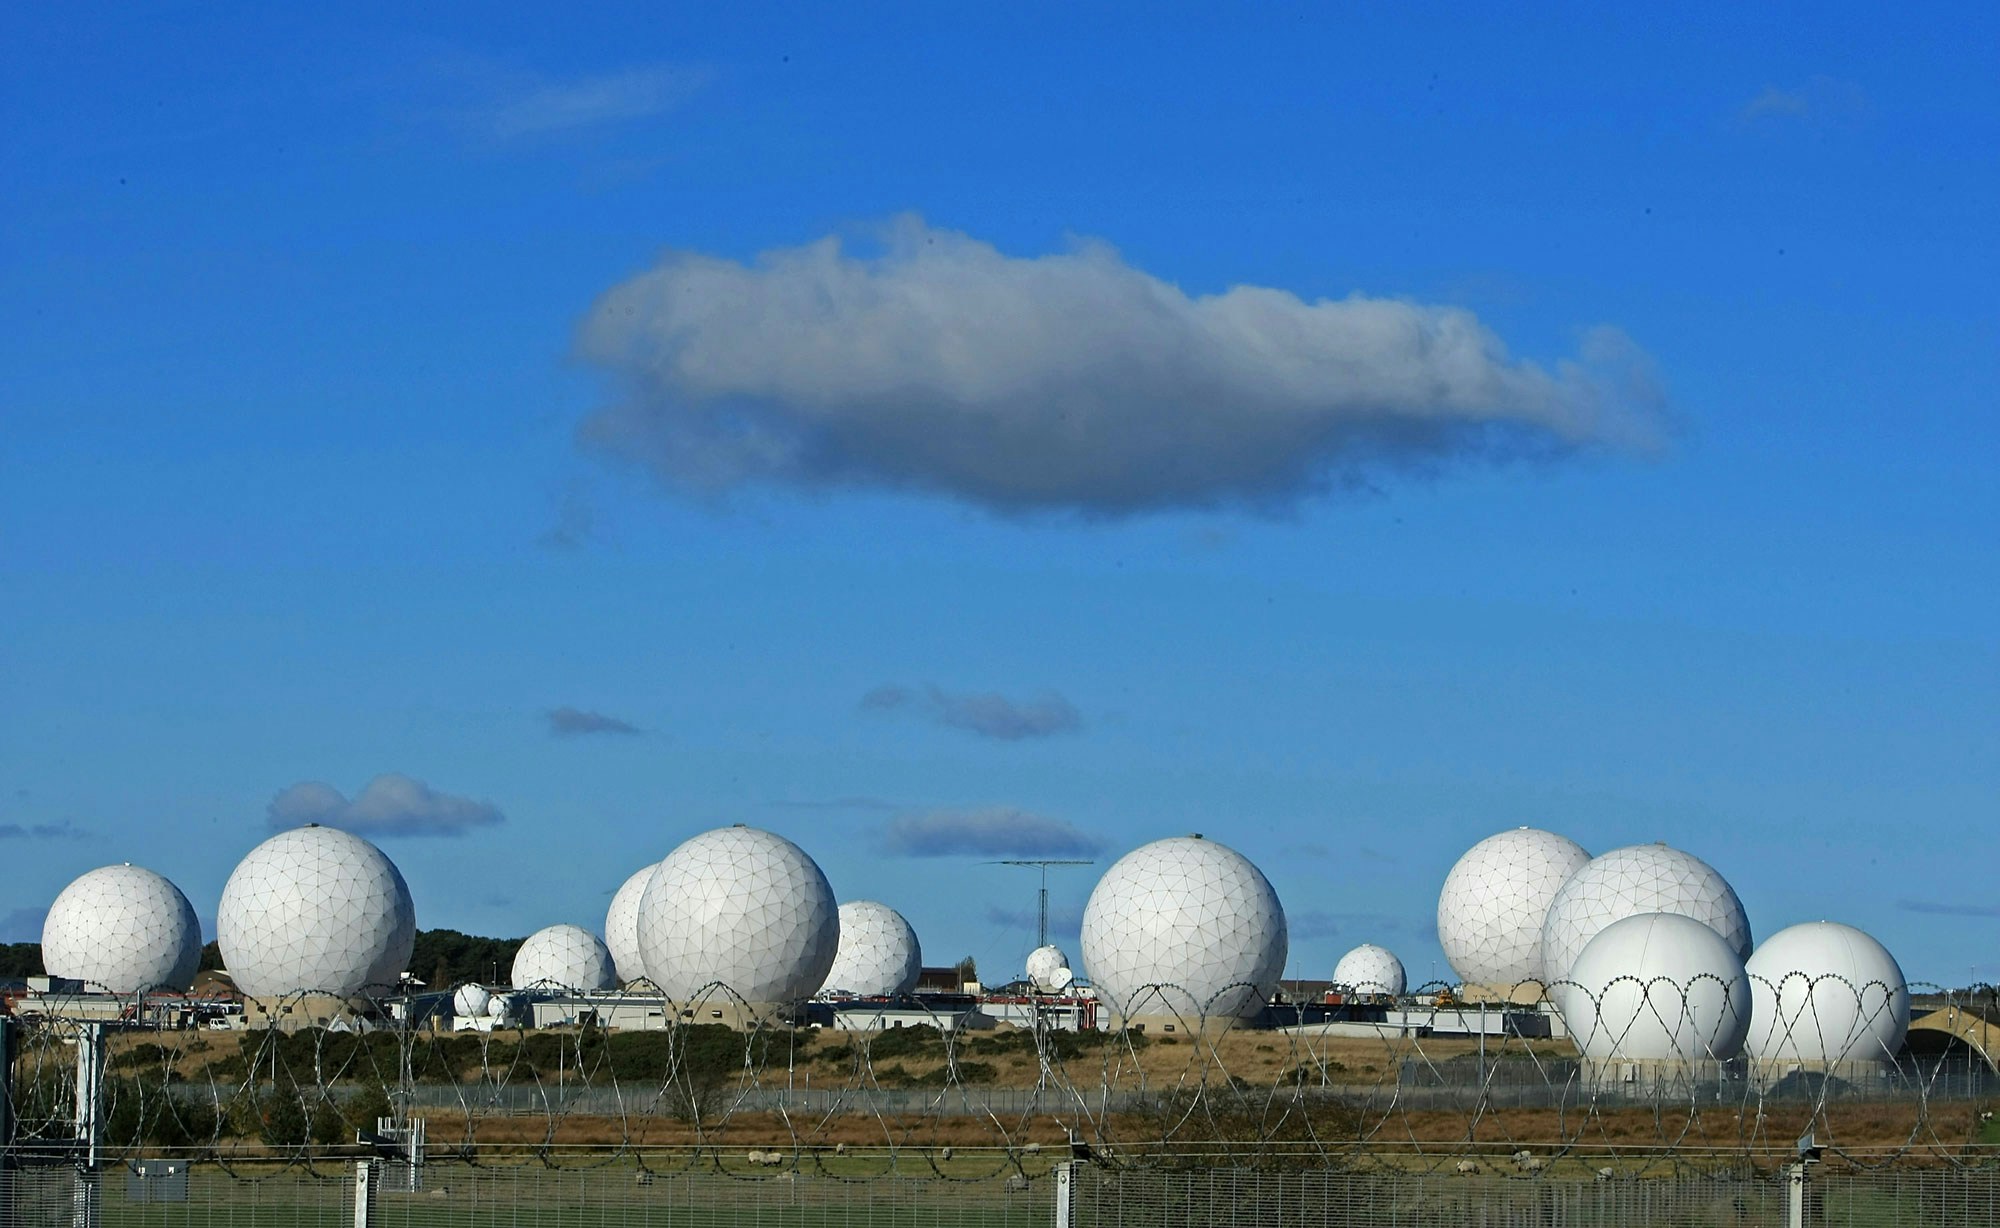 HARROGATE, UNITED KINGDOM - OCTOBER 30:  The radar domes of RAF Menwith Hill in north Yorkshire dominate the skyline on 30 October, 2007, Harrogate, England. The base is reported to be the biggest spy base in the world. Britain recently agreed to a United States request for the RAF Menwith Hill monitoring station, also known as the 13th field station of the US national security agency, in North Yorkshire to be used as part of its missile defence system. Dubbed 'Star Wars Bases' by anti-war and CND campaigners. The facility houses British and United States personnel.  (Photo by Christopher Furlong/Getty Images)